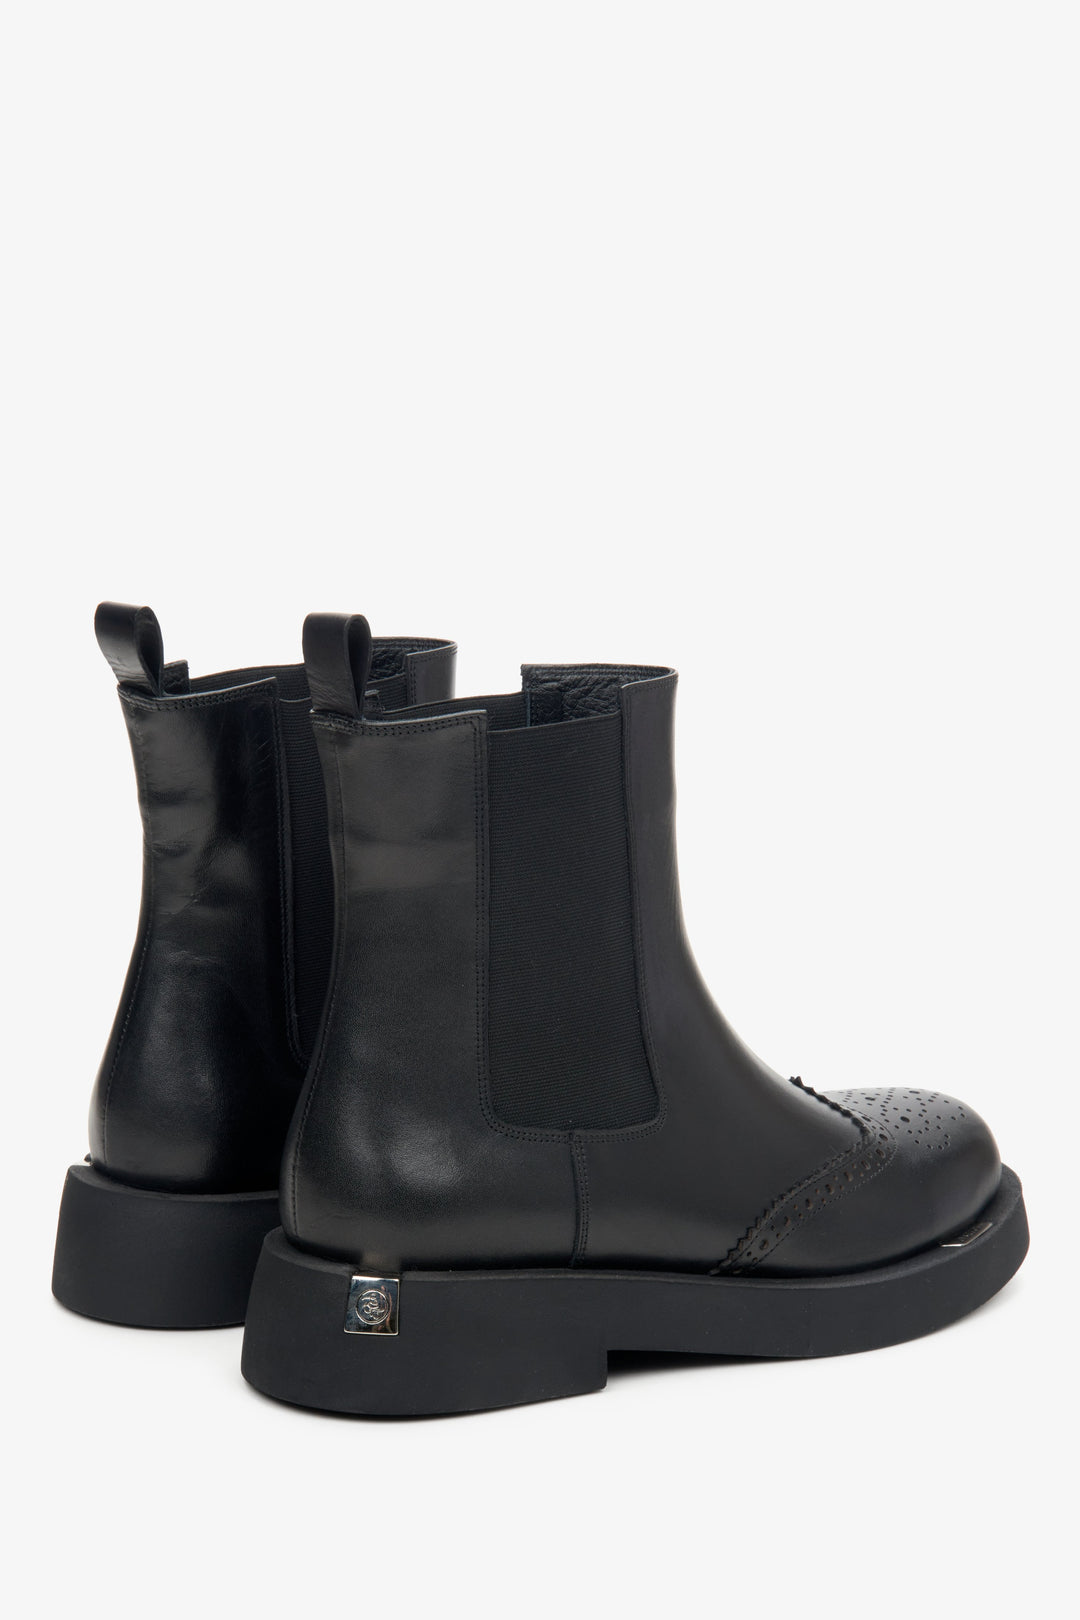 Women's black leather Estro Chelsea boots - close-up on the side seam.